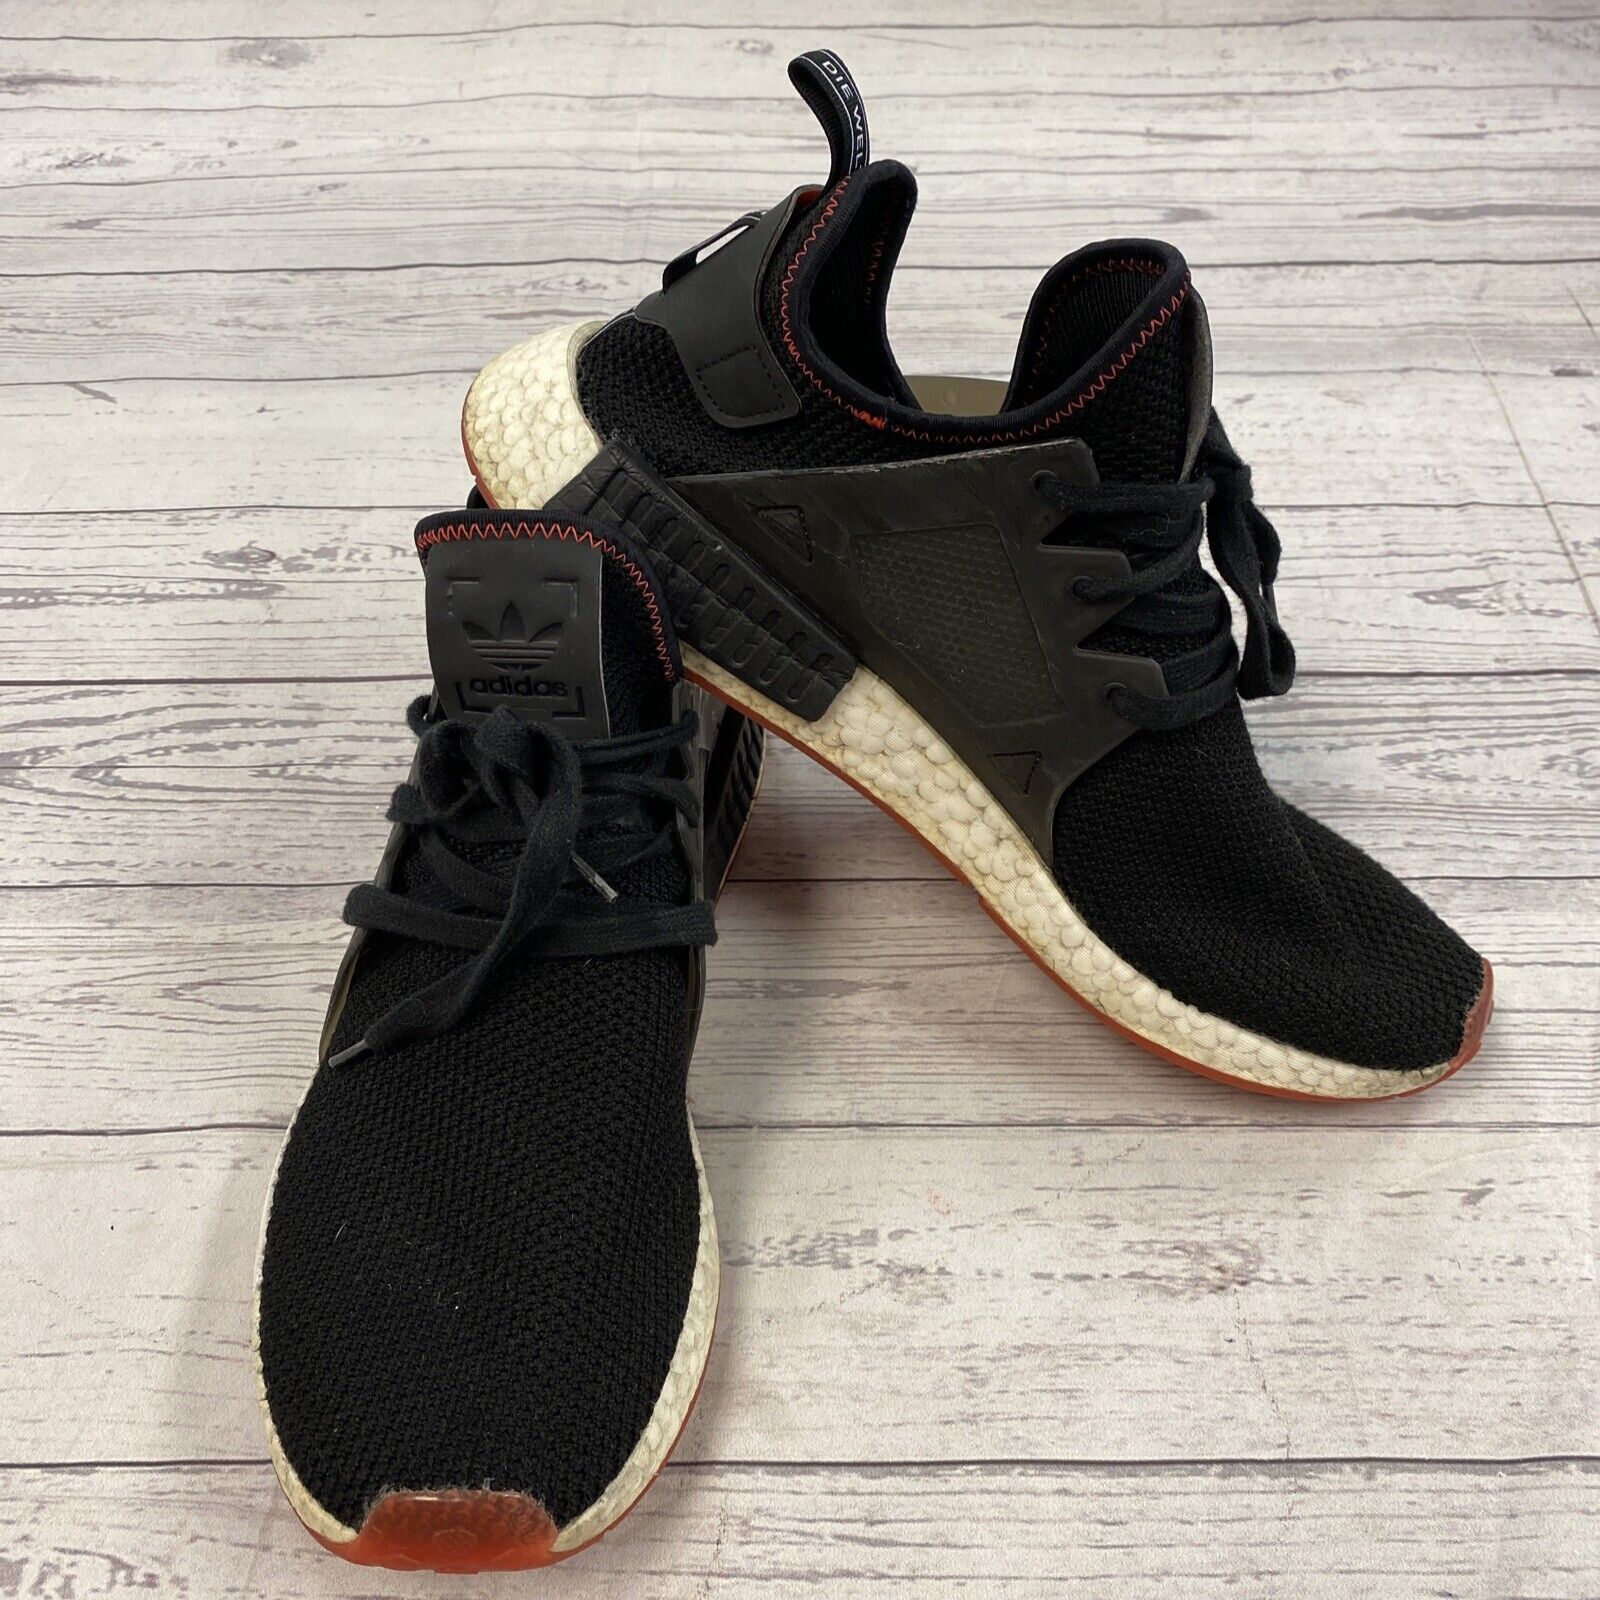 nmd xr1 shoes